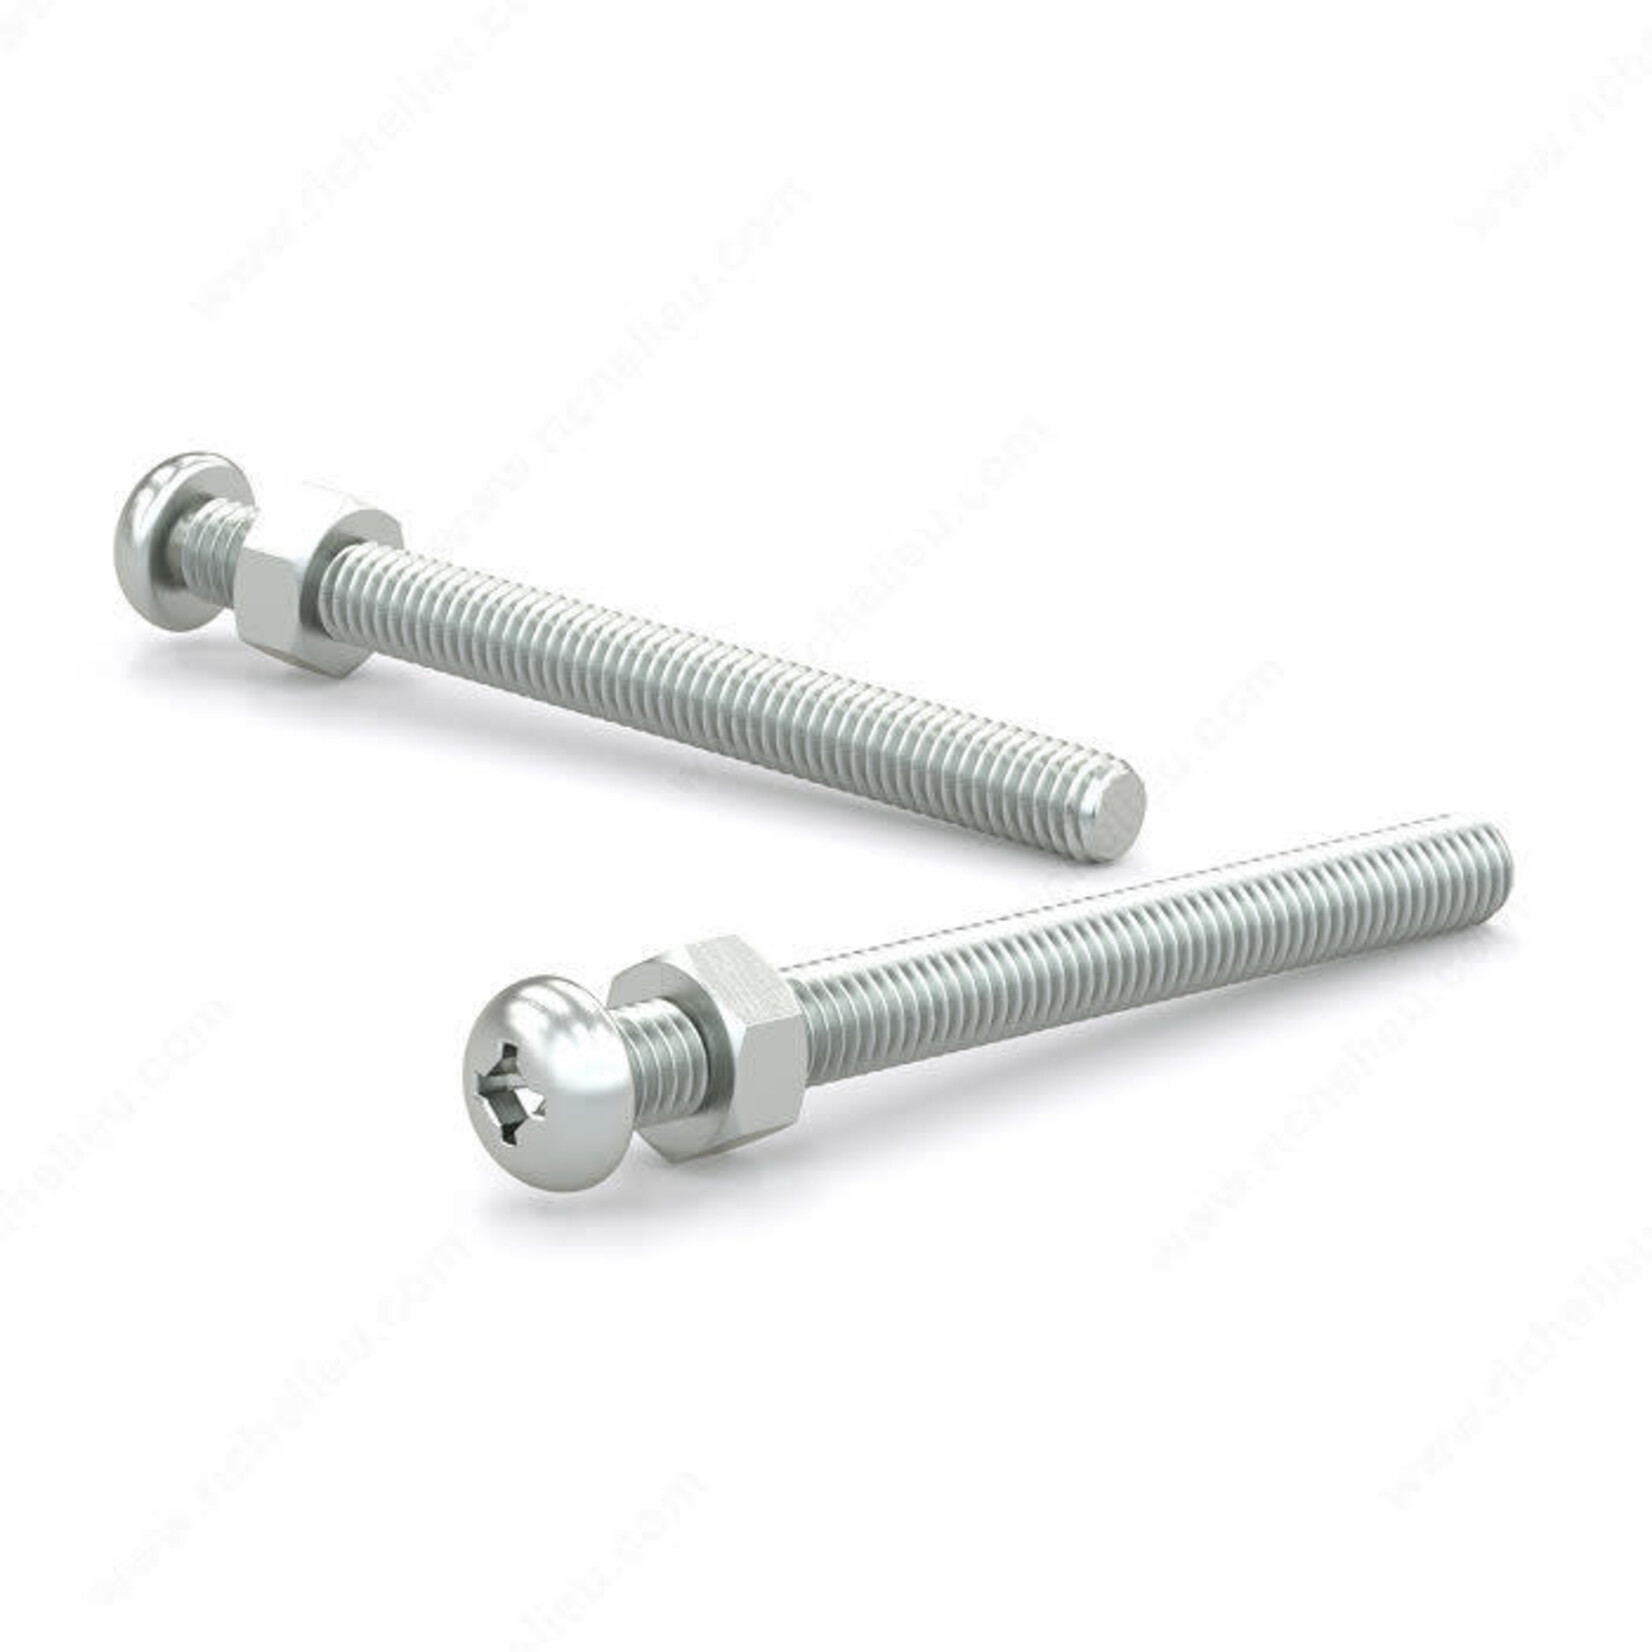 RELIABLE MACHINE SCREW WITH NUT, PAN HEAD, 10-32 1-1/4IN, 10PK BLISTER